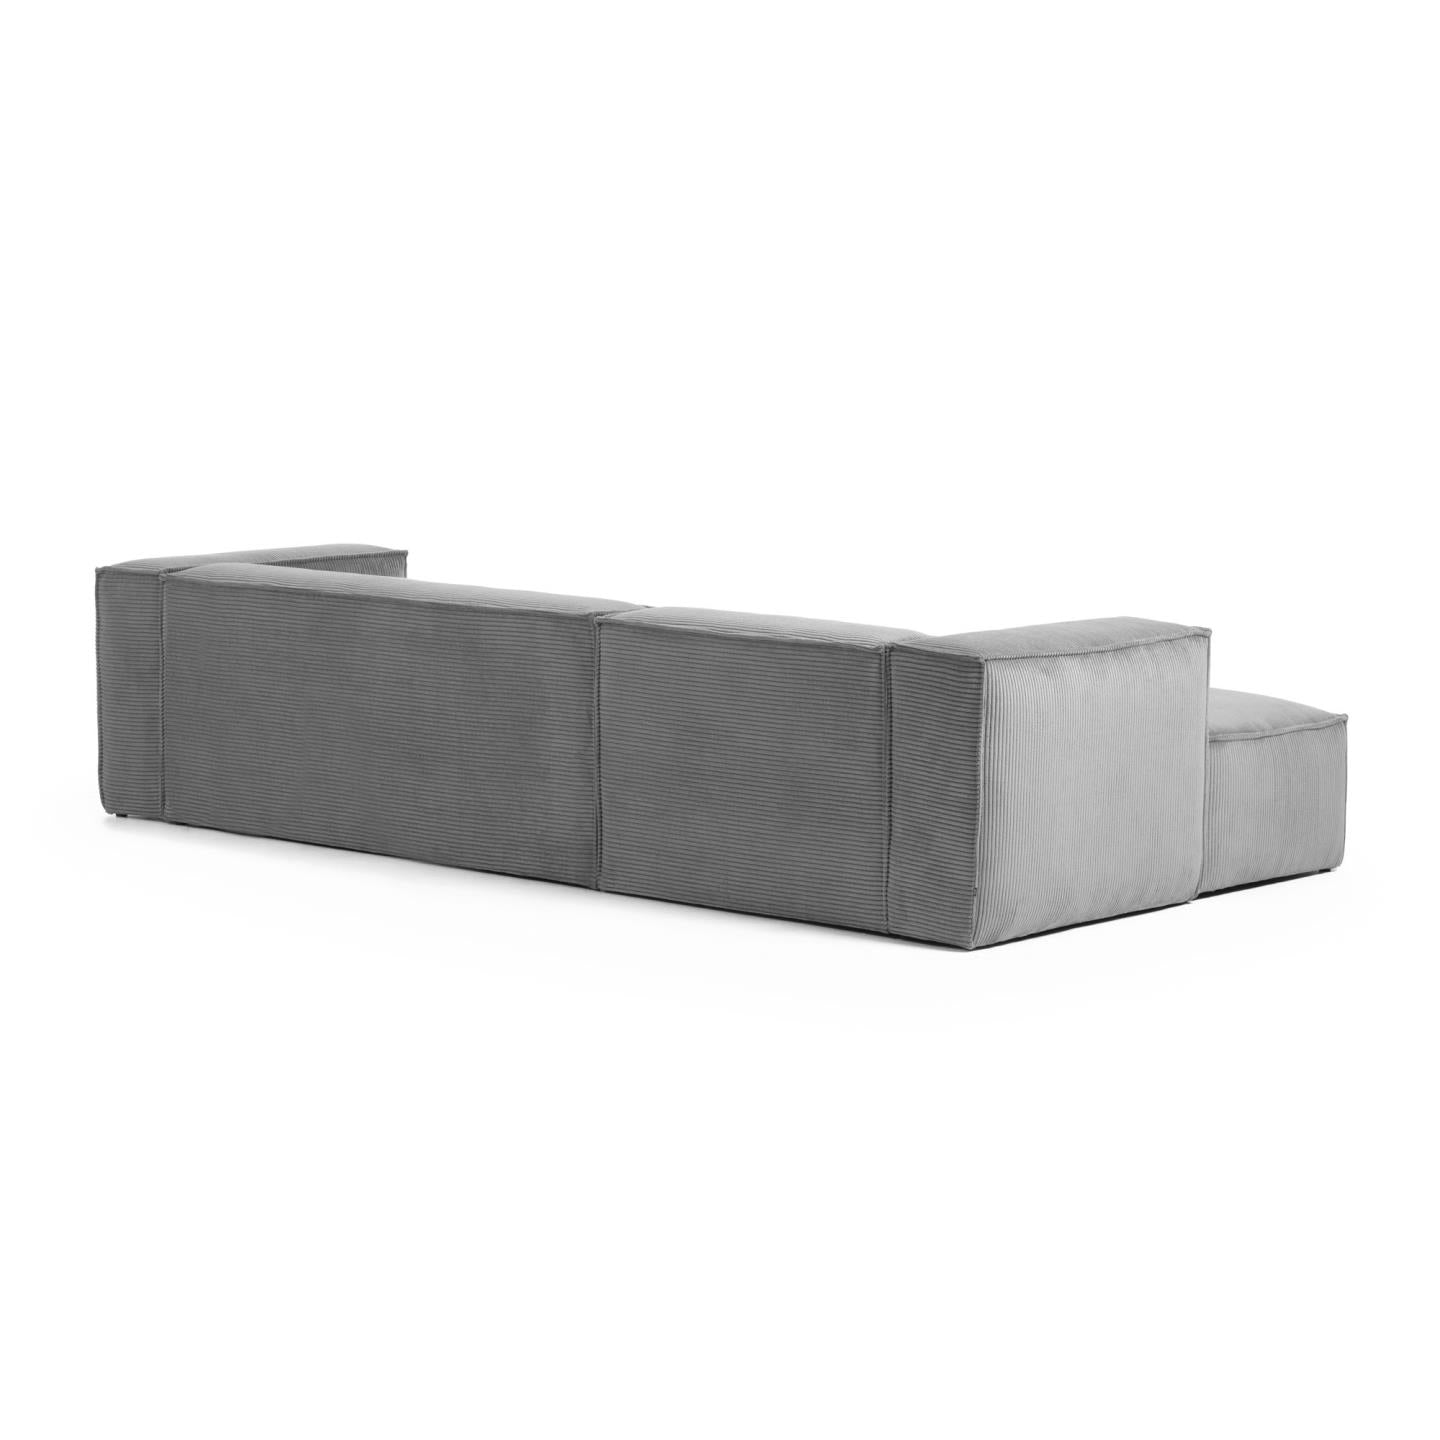 Blok 3 seater sofa with left side chaise longue in grey wide seam corduroy, 300 cm